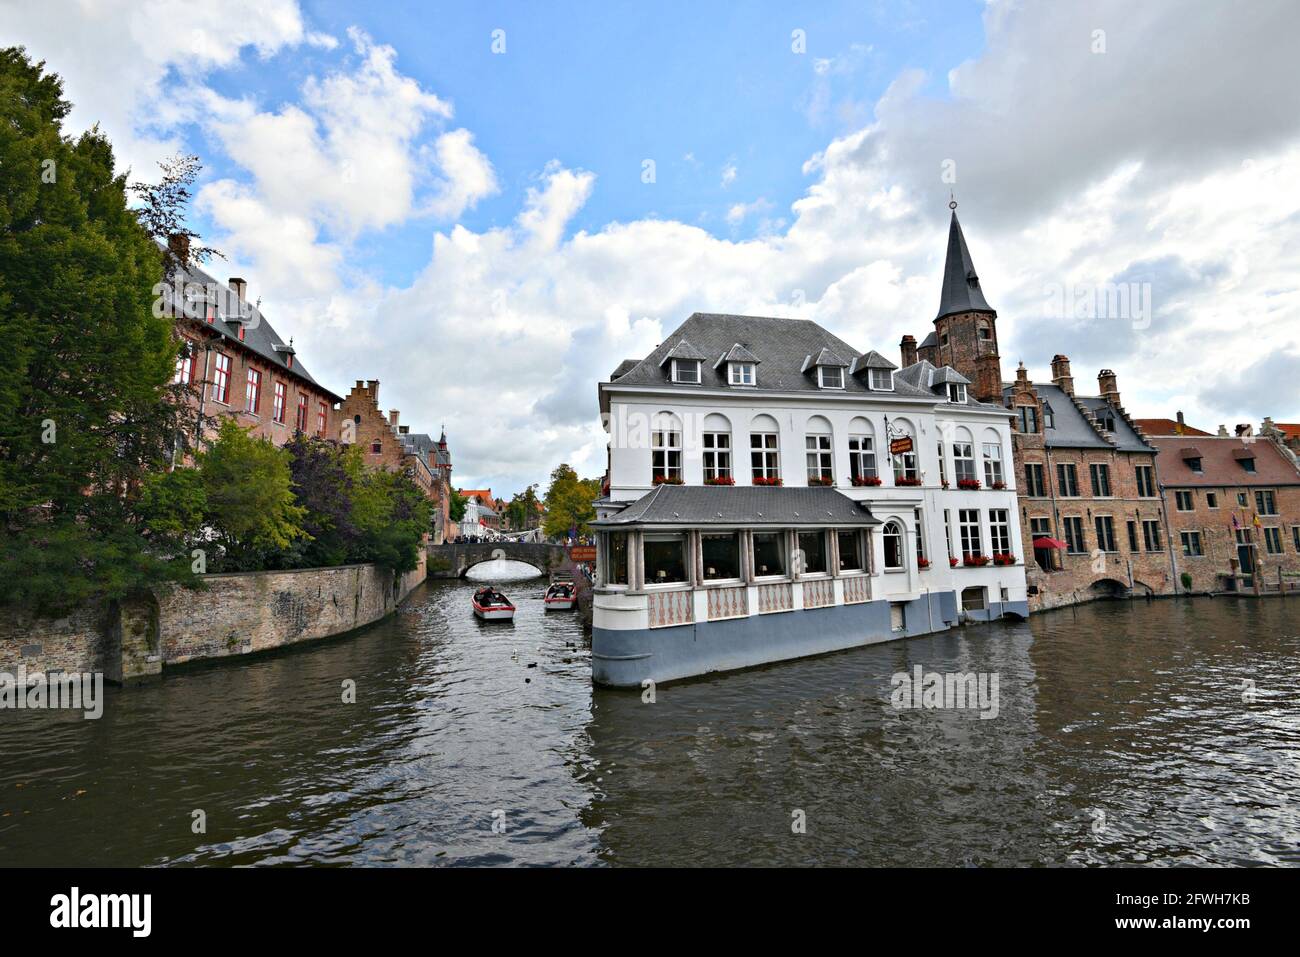 Scenic view of Duc De Bourgogne, a historic Victorian Hotel and Restaurant on the banks of Dijver Canal in the historic center of Bruges, Belgium. Stock Photo